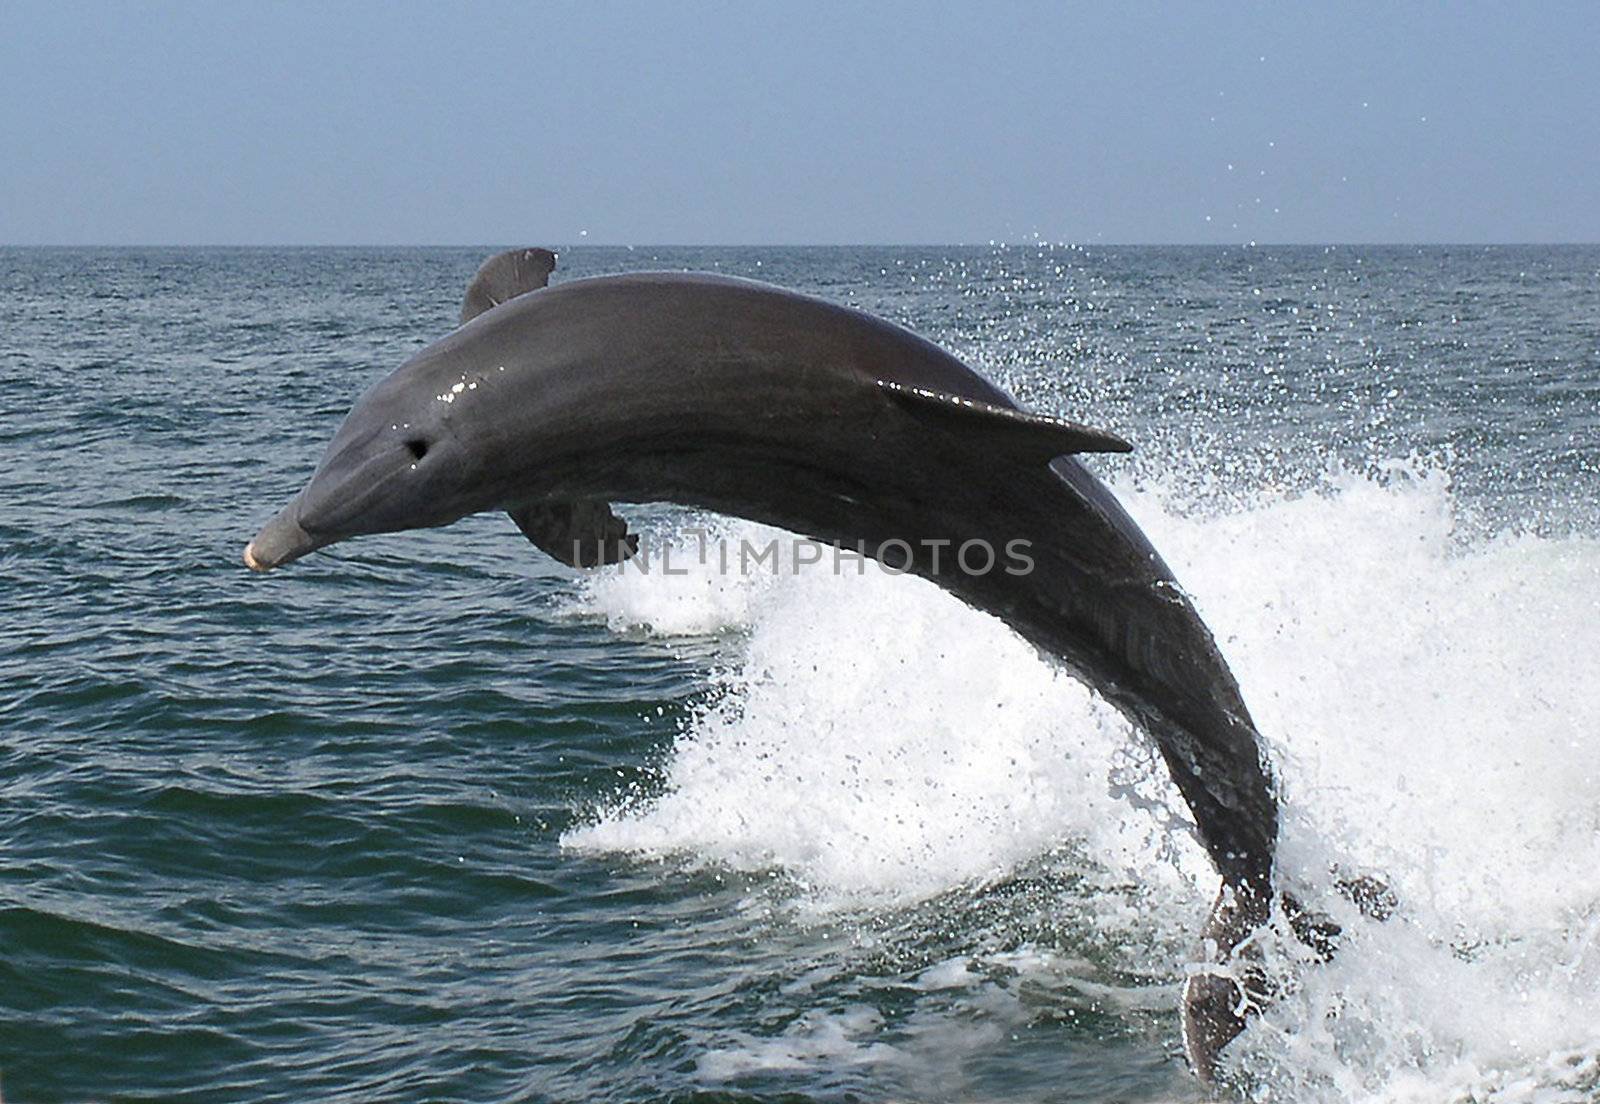 A dolphin leaps majestically from the ocean, twisting sideways through the air as it does so.